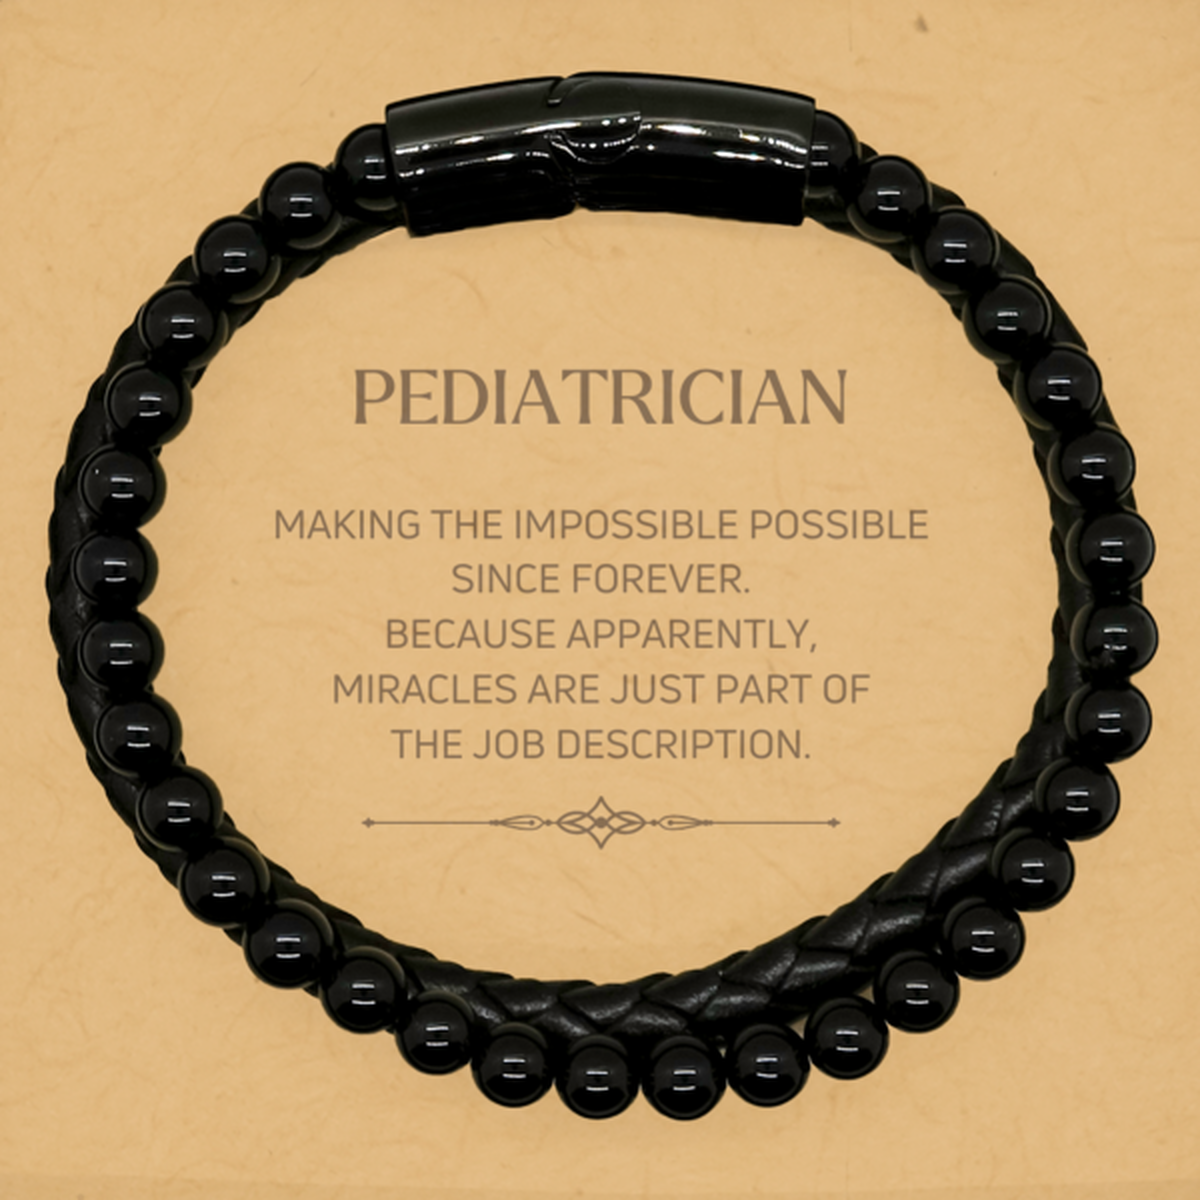 Funny Pediatrician Gifts, Miracles are just part of the job description, Inspirational Birthday Stone Leather Bracelets For Pediatrician, Men, Women, Coworkers, Friends, Boss